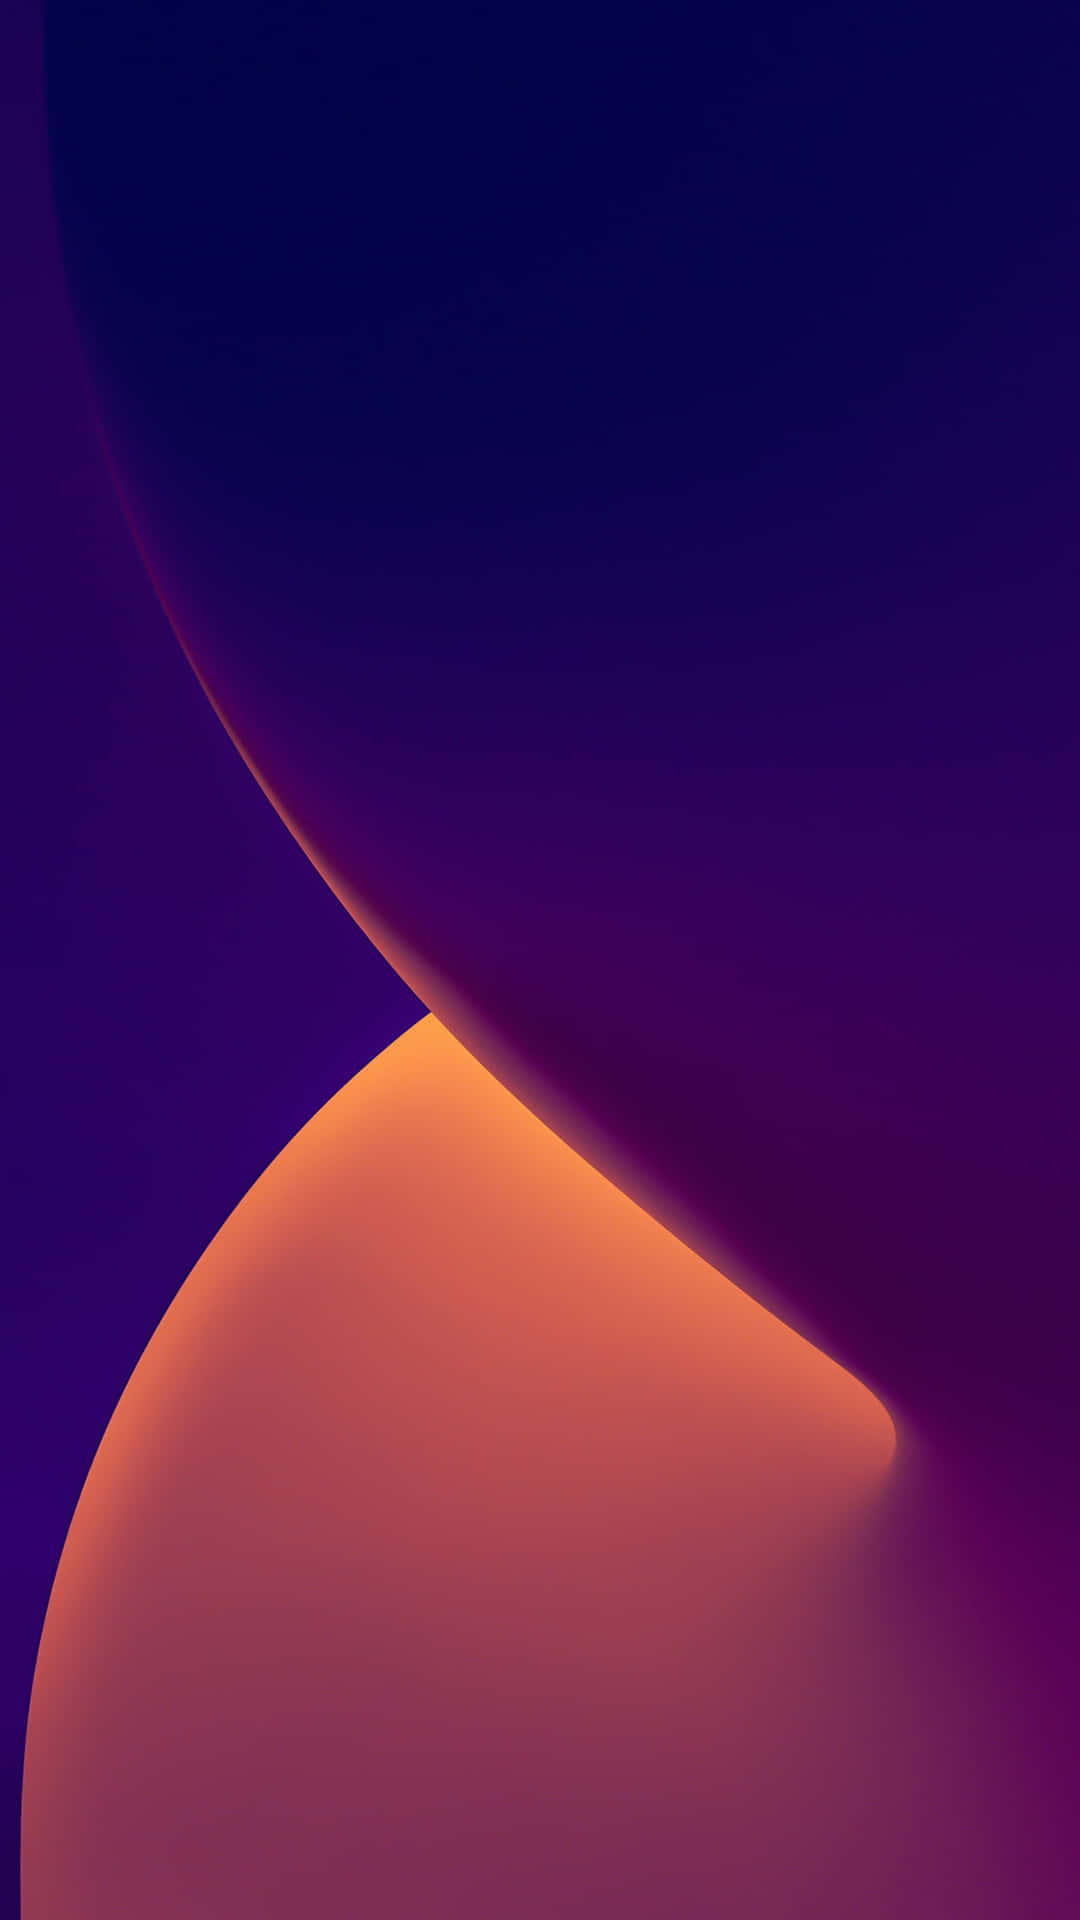 An Abstract Purple And Orange Background